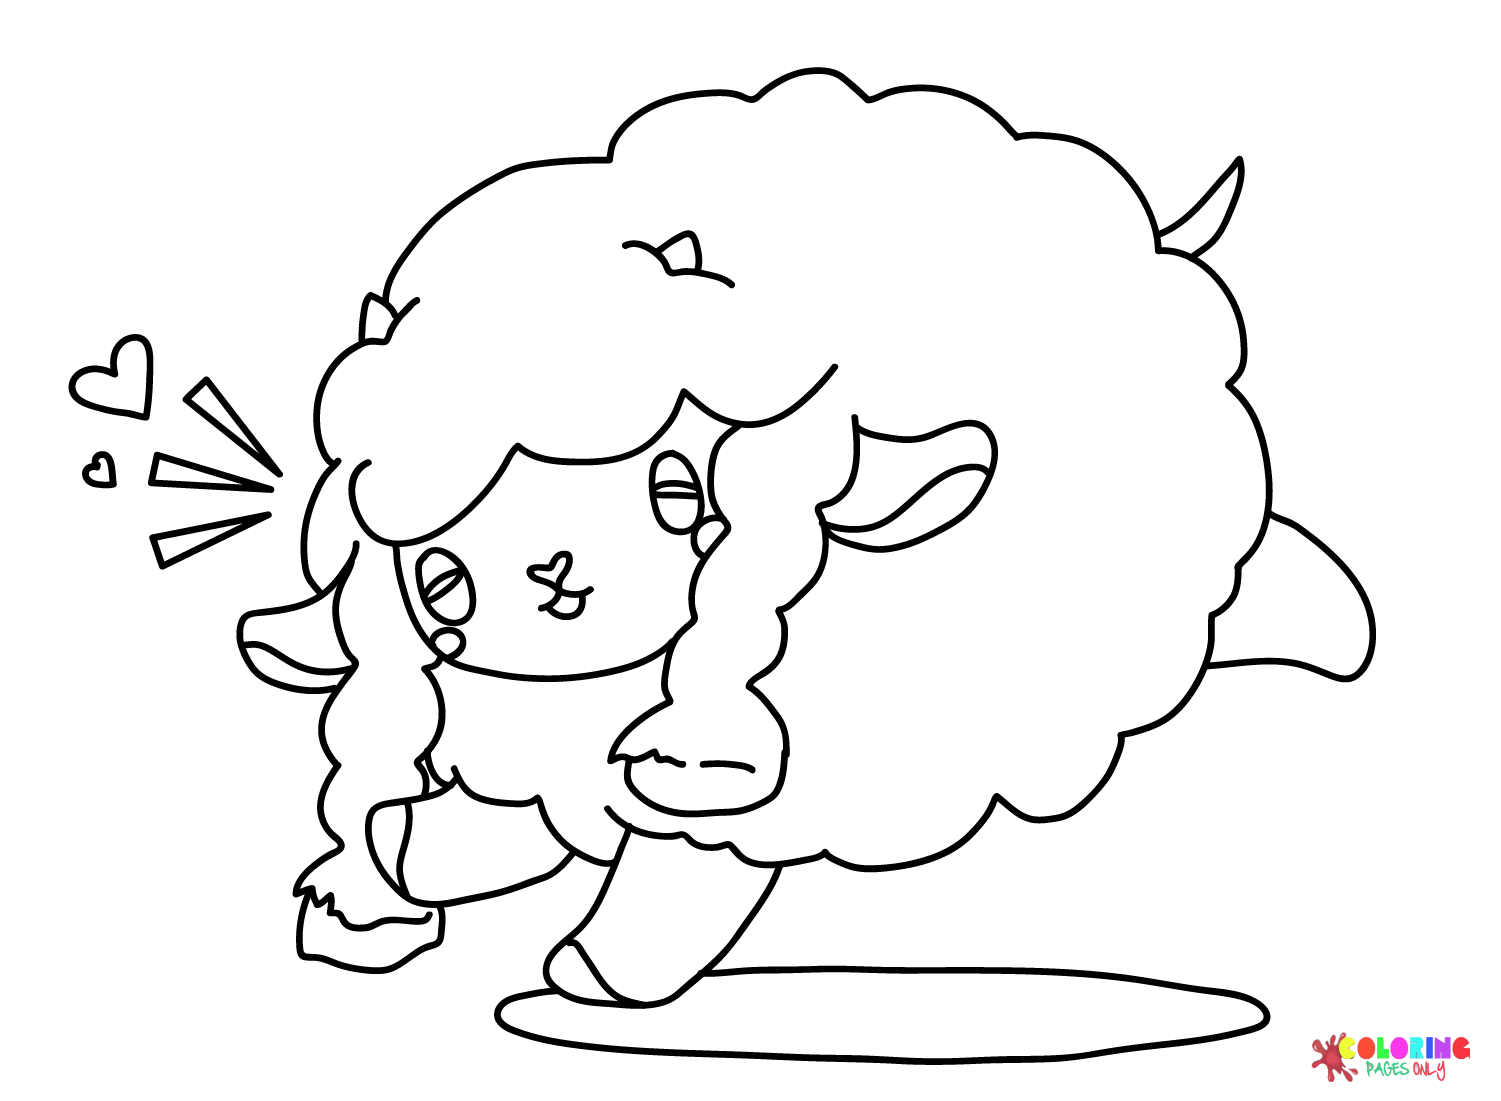 The Wooloo Pokemon from Wooloo